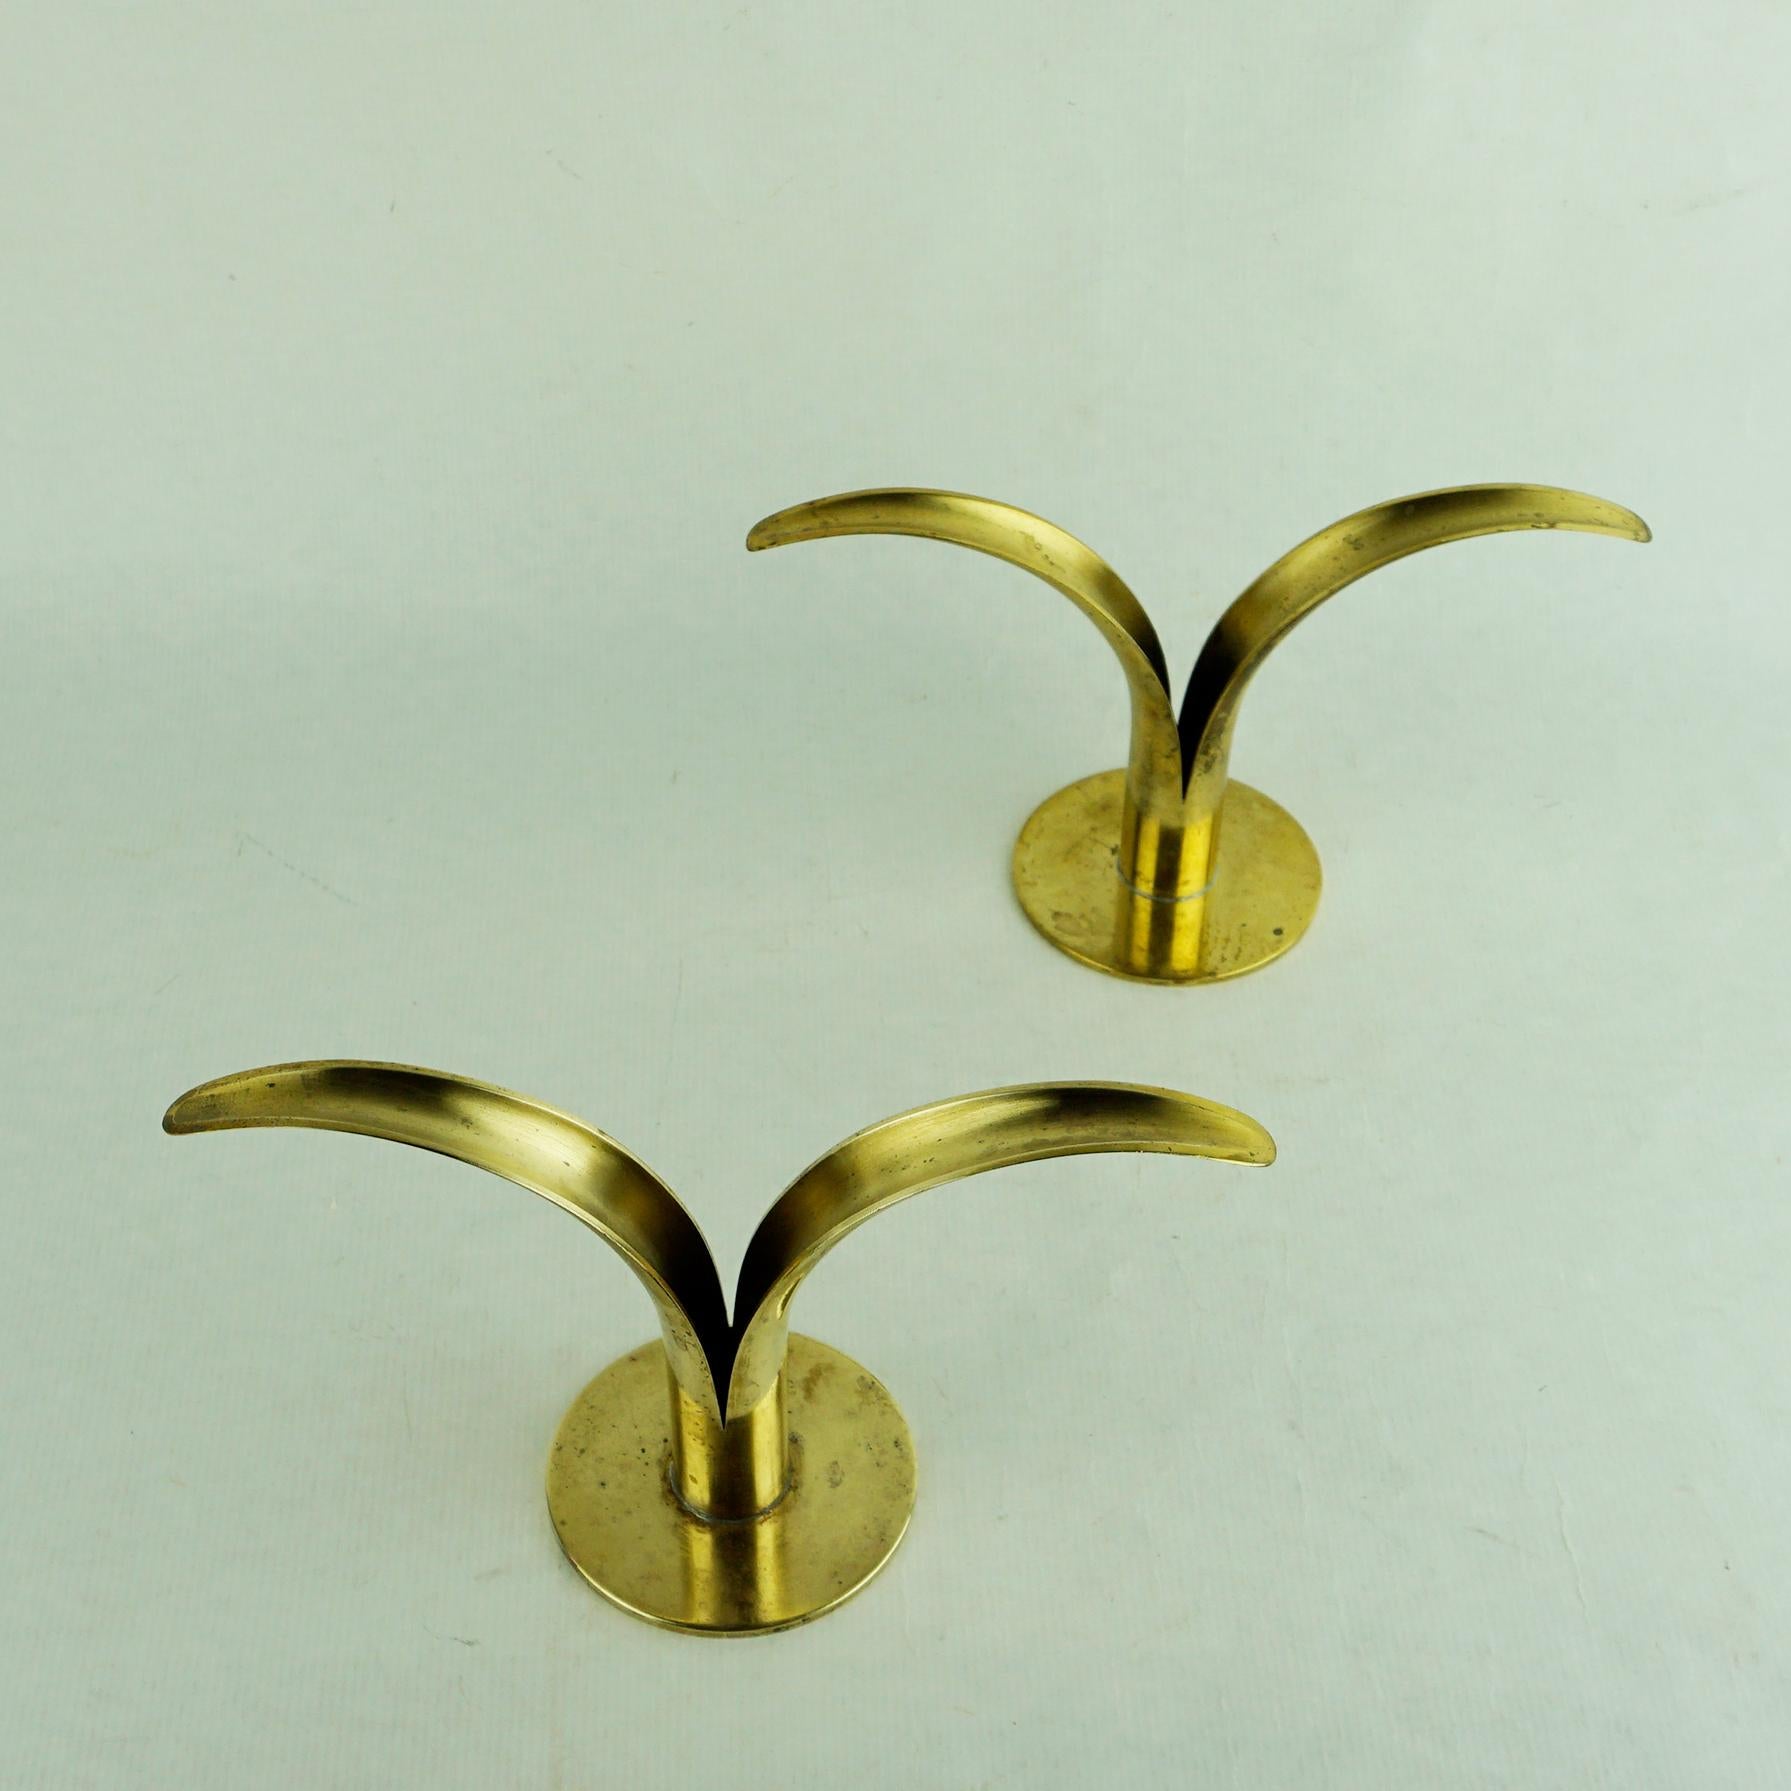 A pair of charming Lily (Liljan) candleholders, originally designed in 1939 by Ivar A°lenius Bjo¨rk (1905-1978) and produced in Sweden by Ystad-Metall, each in warm, polished brass. Each includes [IAB/Ystad-Metall/Made in Sweden] stamped to the